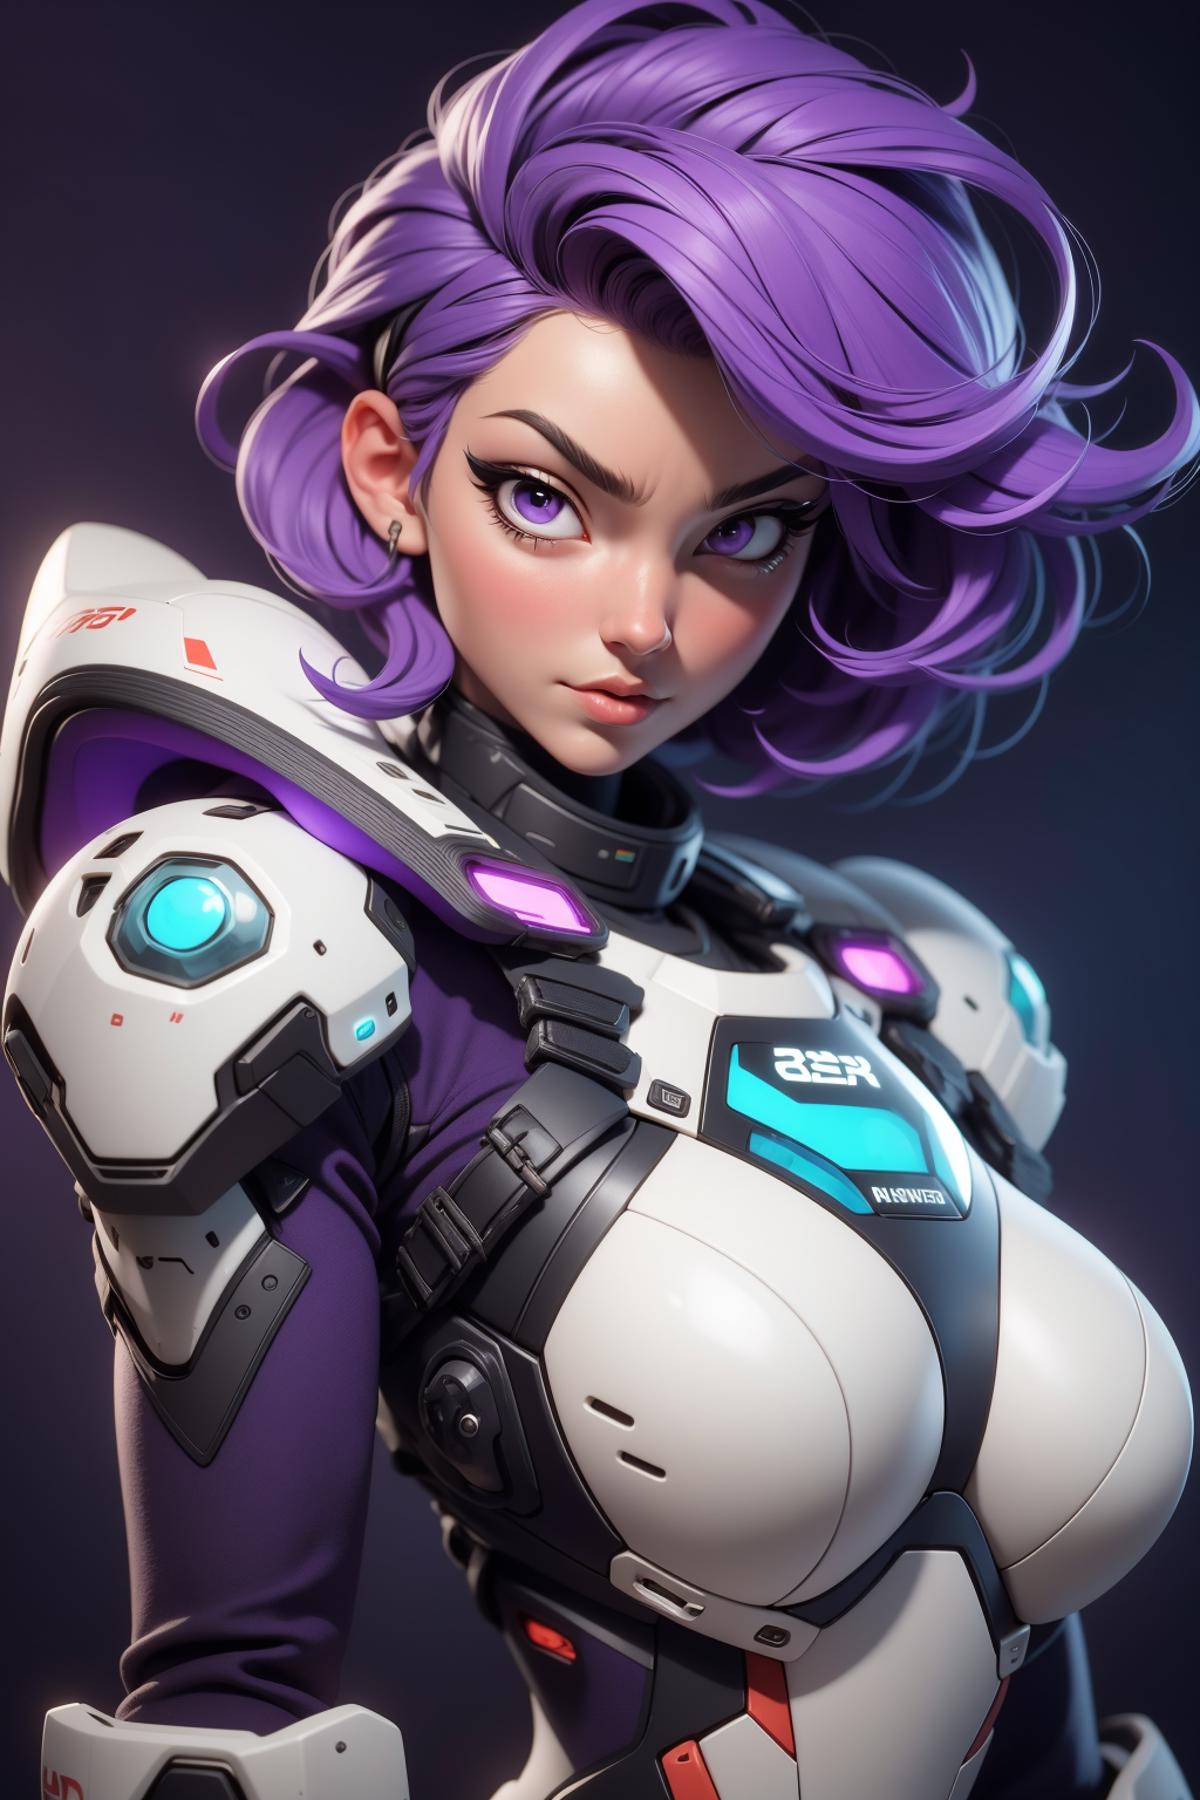 A purple haired woman with a futuristic outfit on.